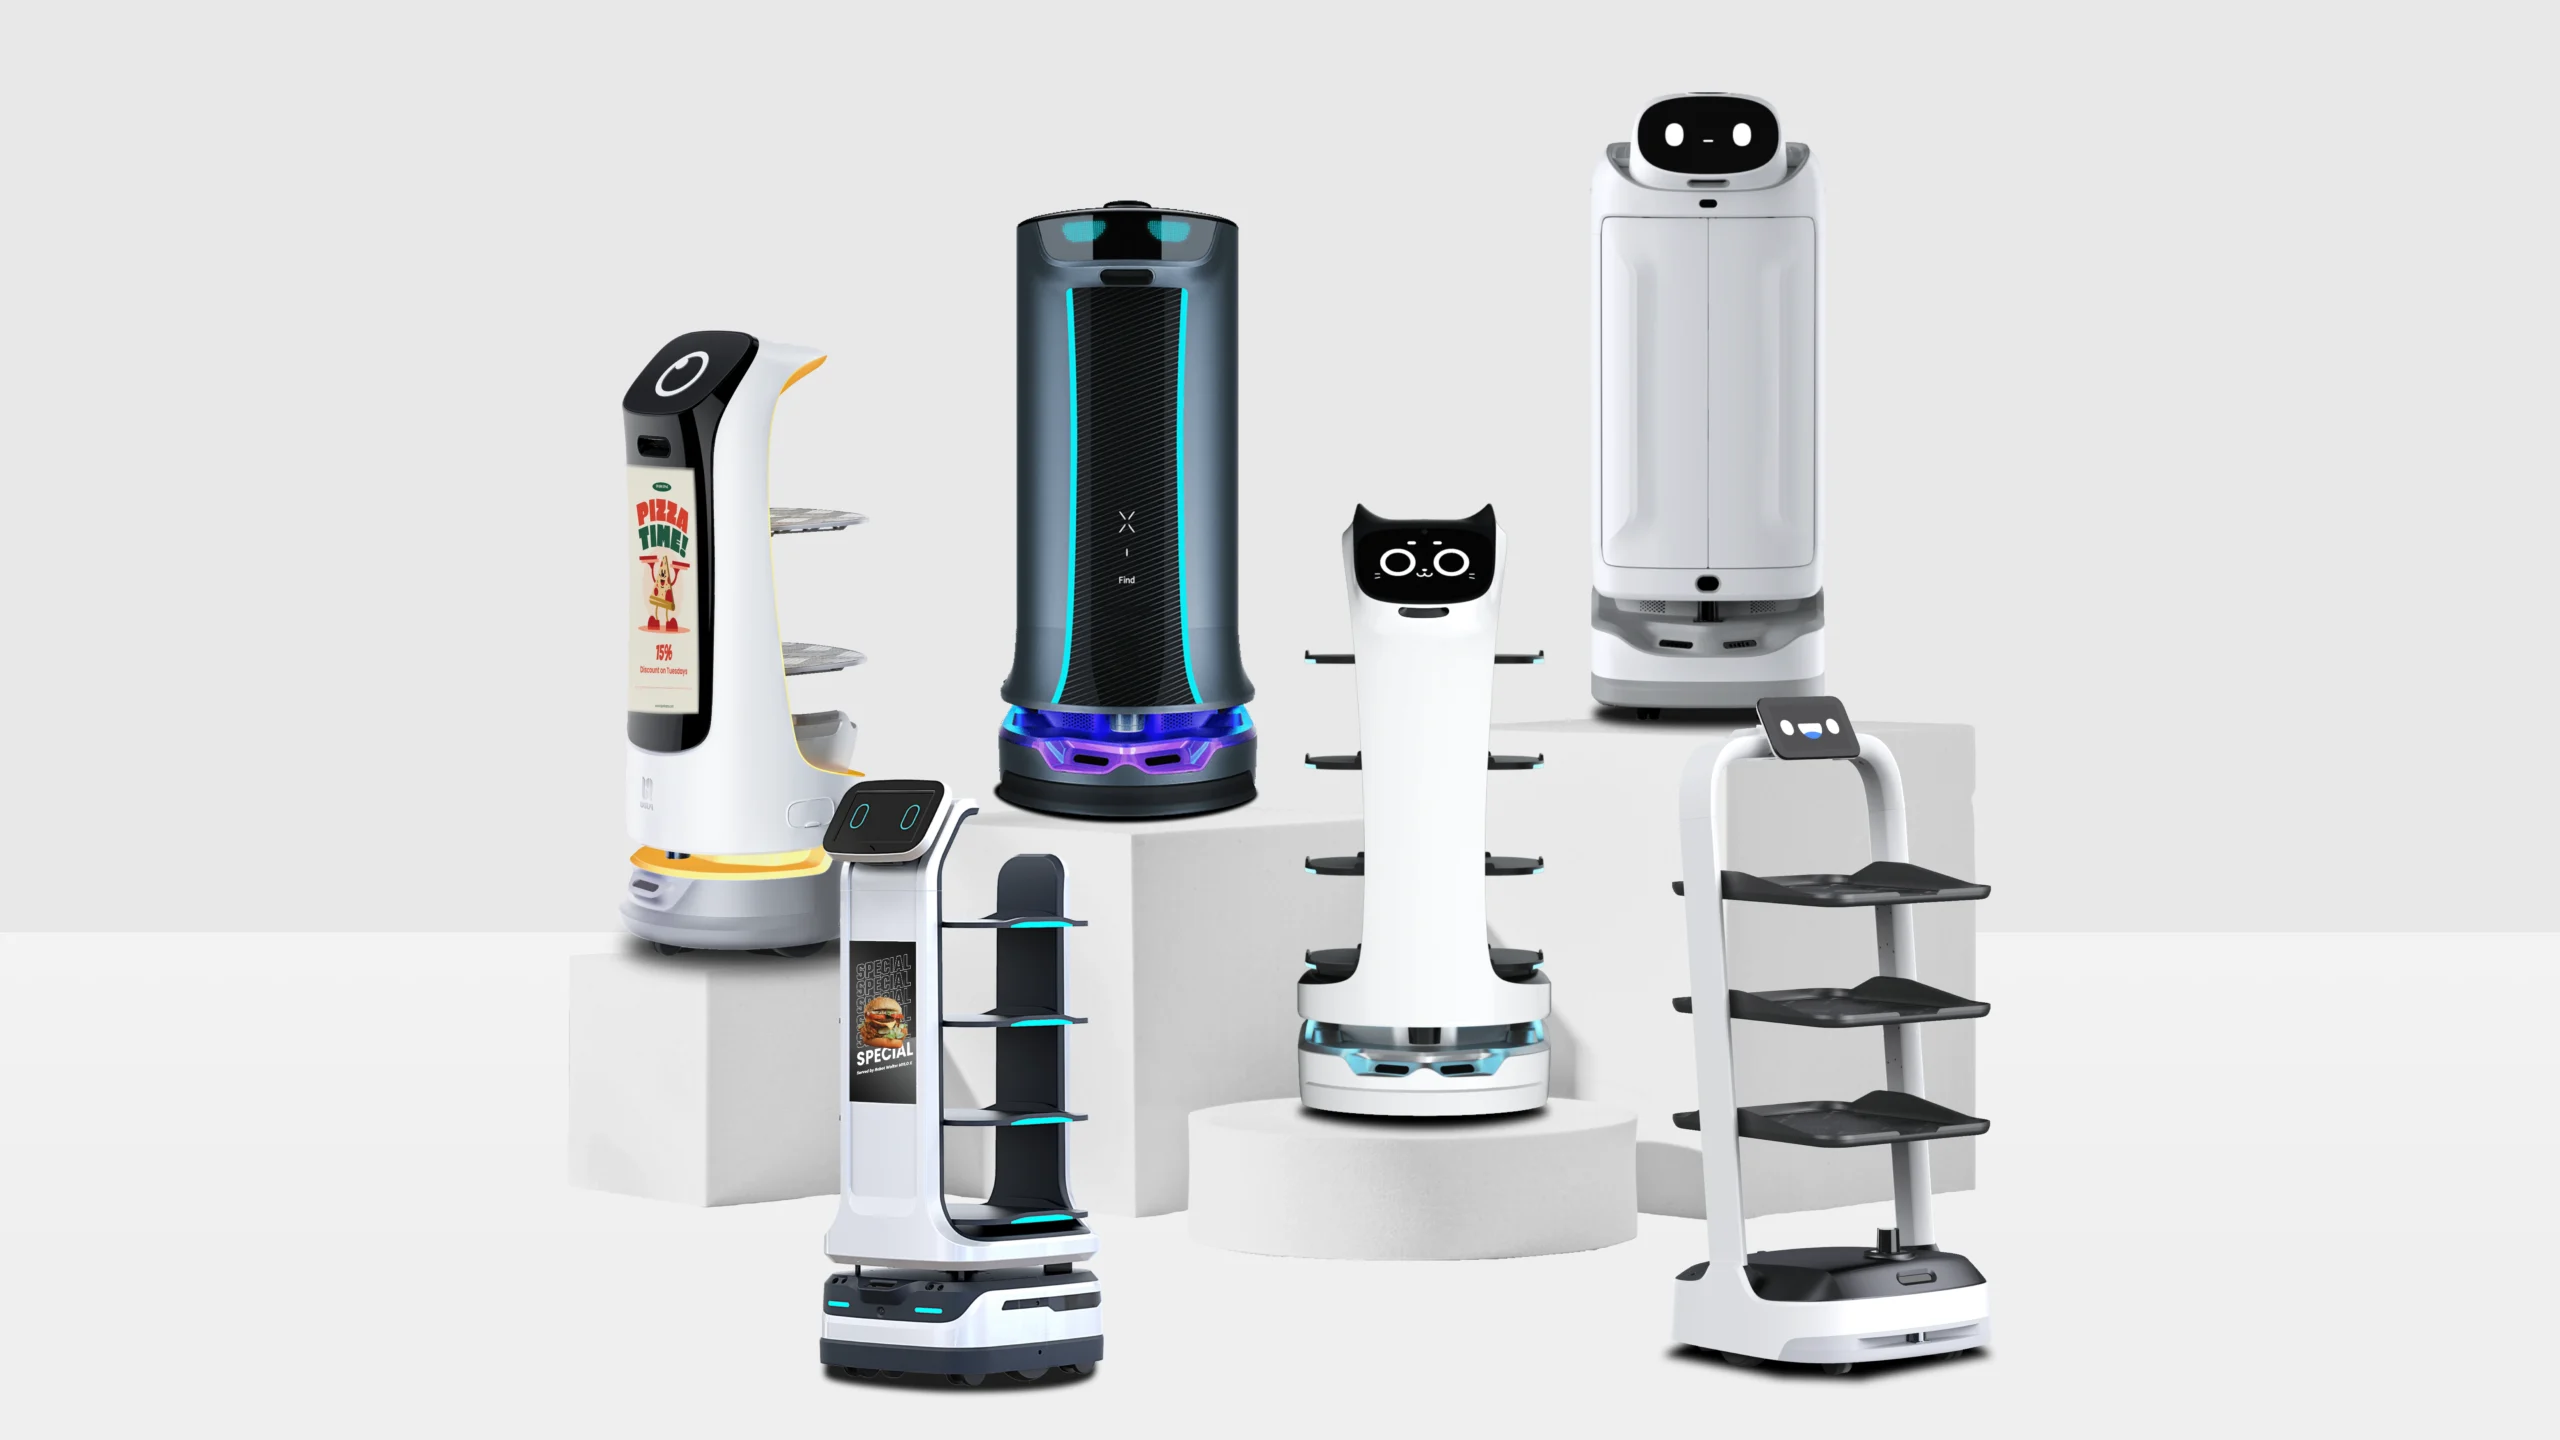 Image of service robot family